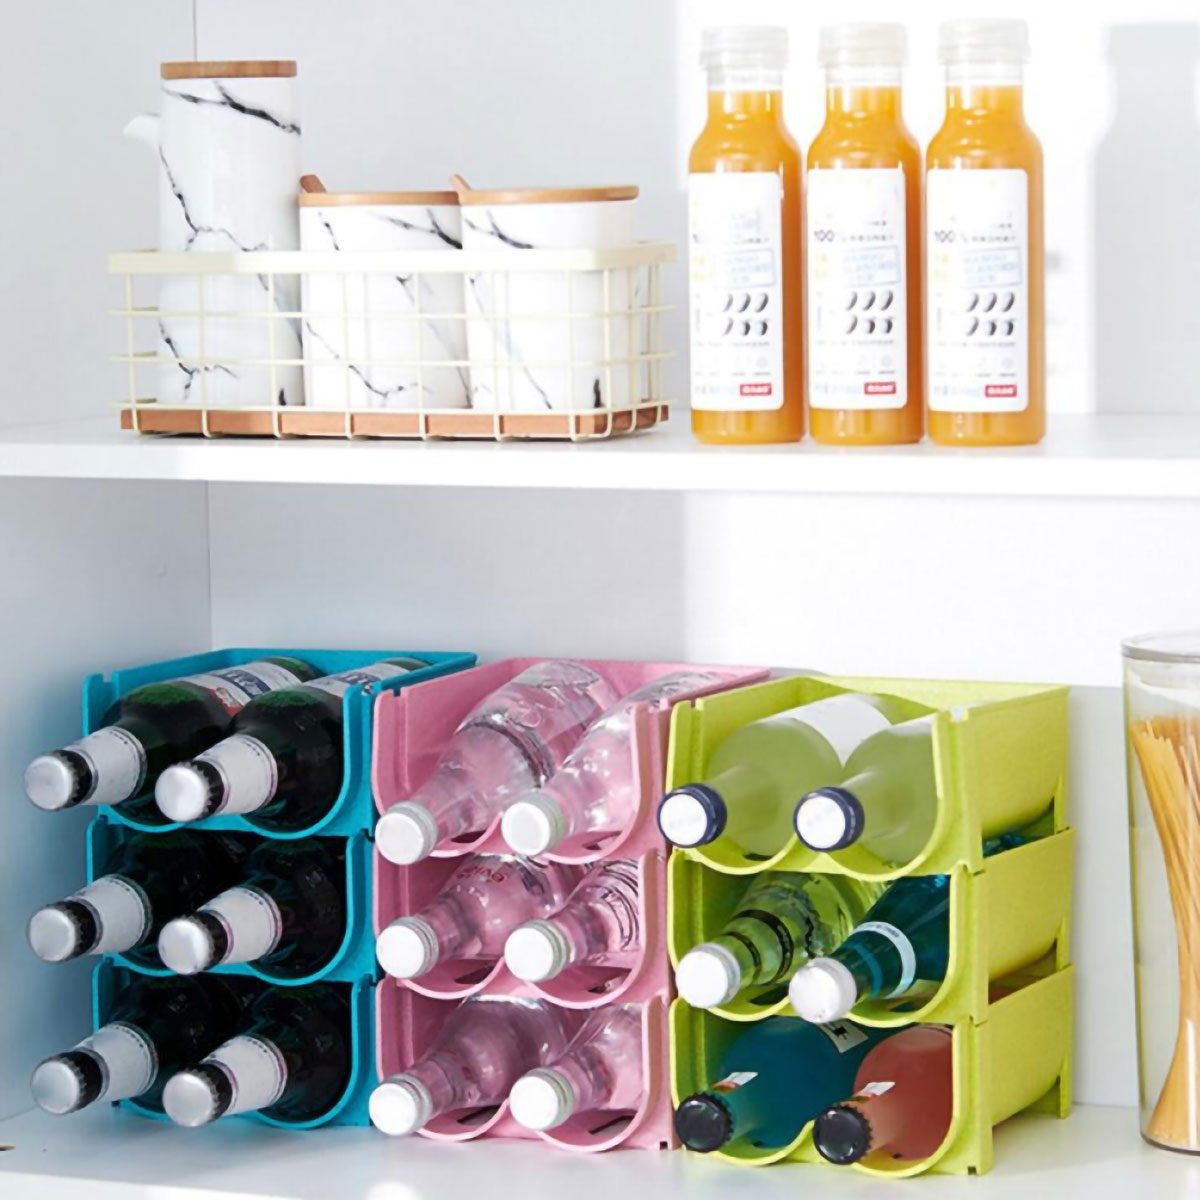 Gorgeous Ways to Organize Glassware, Cups and Water Bottles